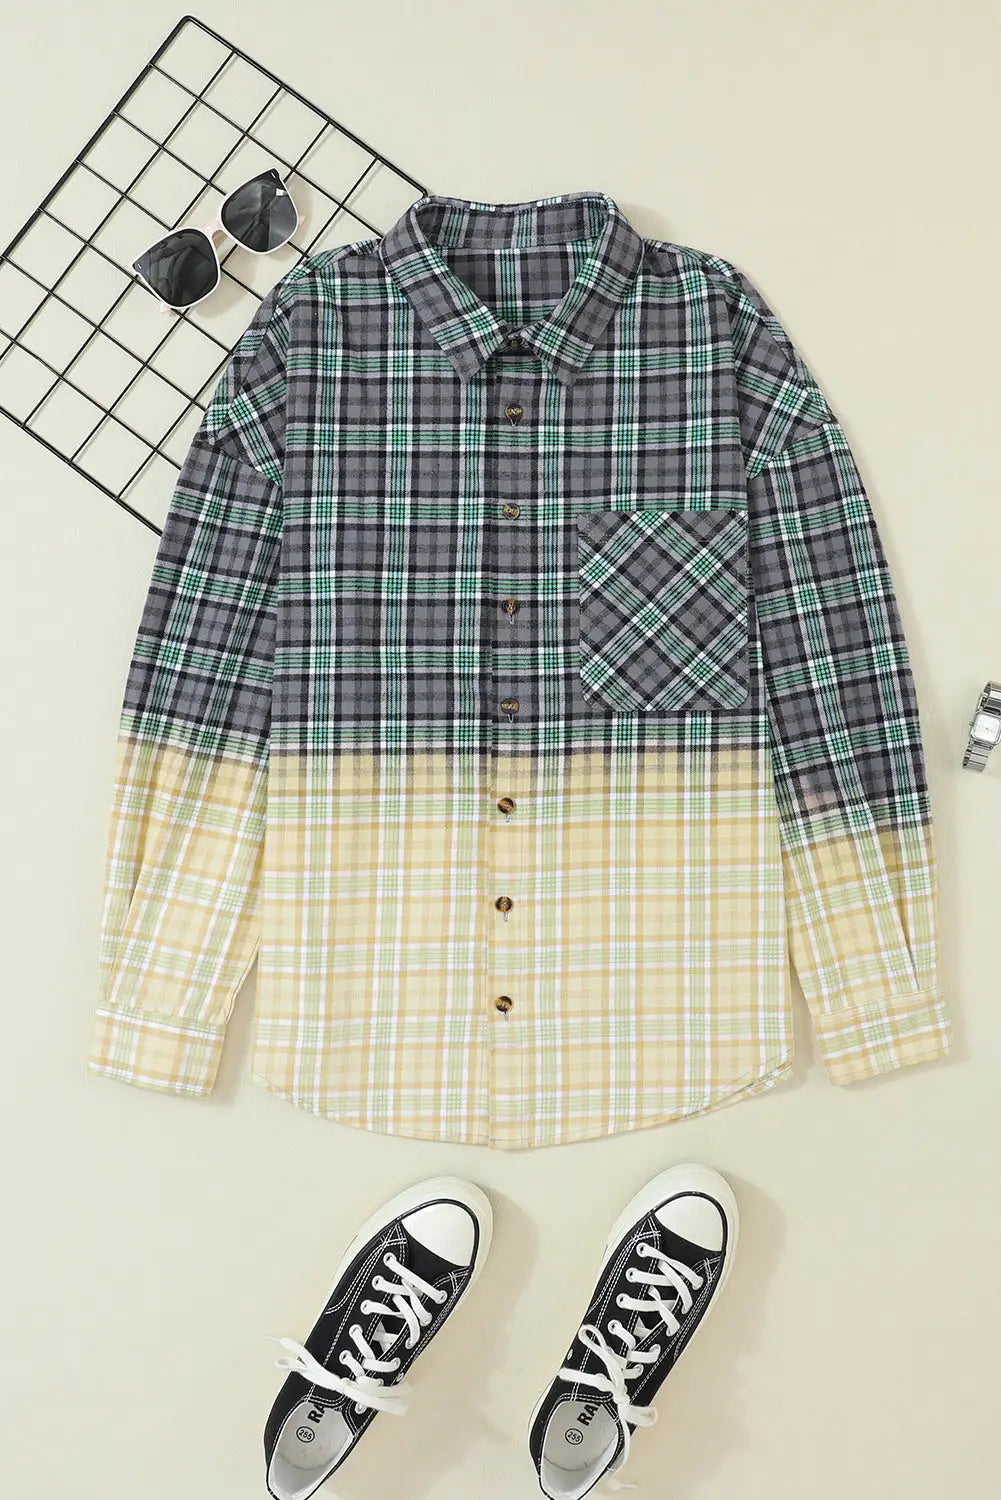 Blackish green contrast plaid patchwork chest pocket button up shacket - shackets